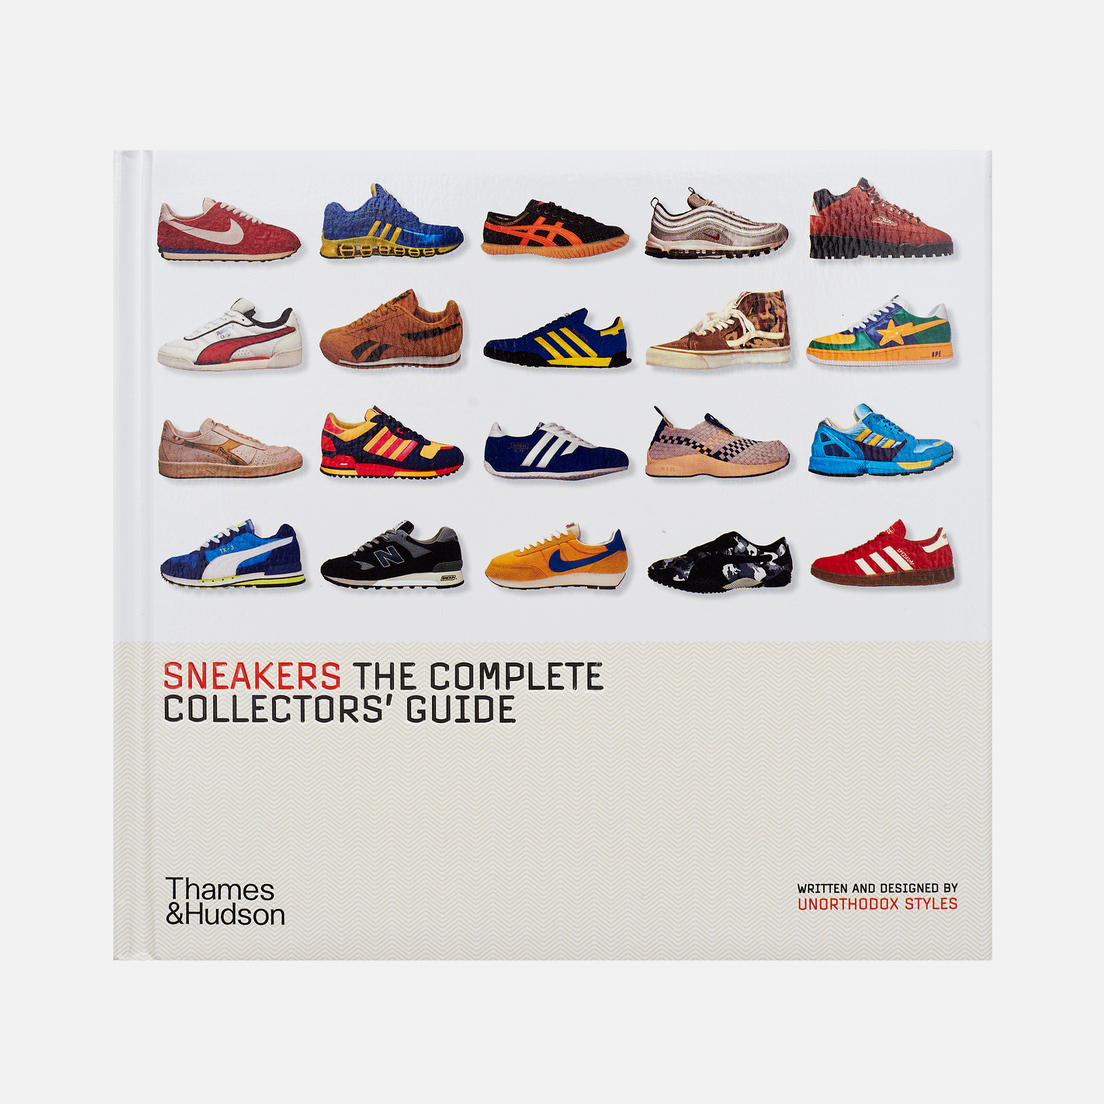 Thames & Hudson Книга Sneakers: The Complete Collectors' Guide